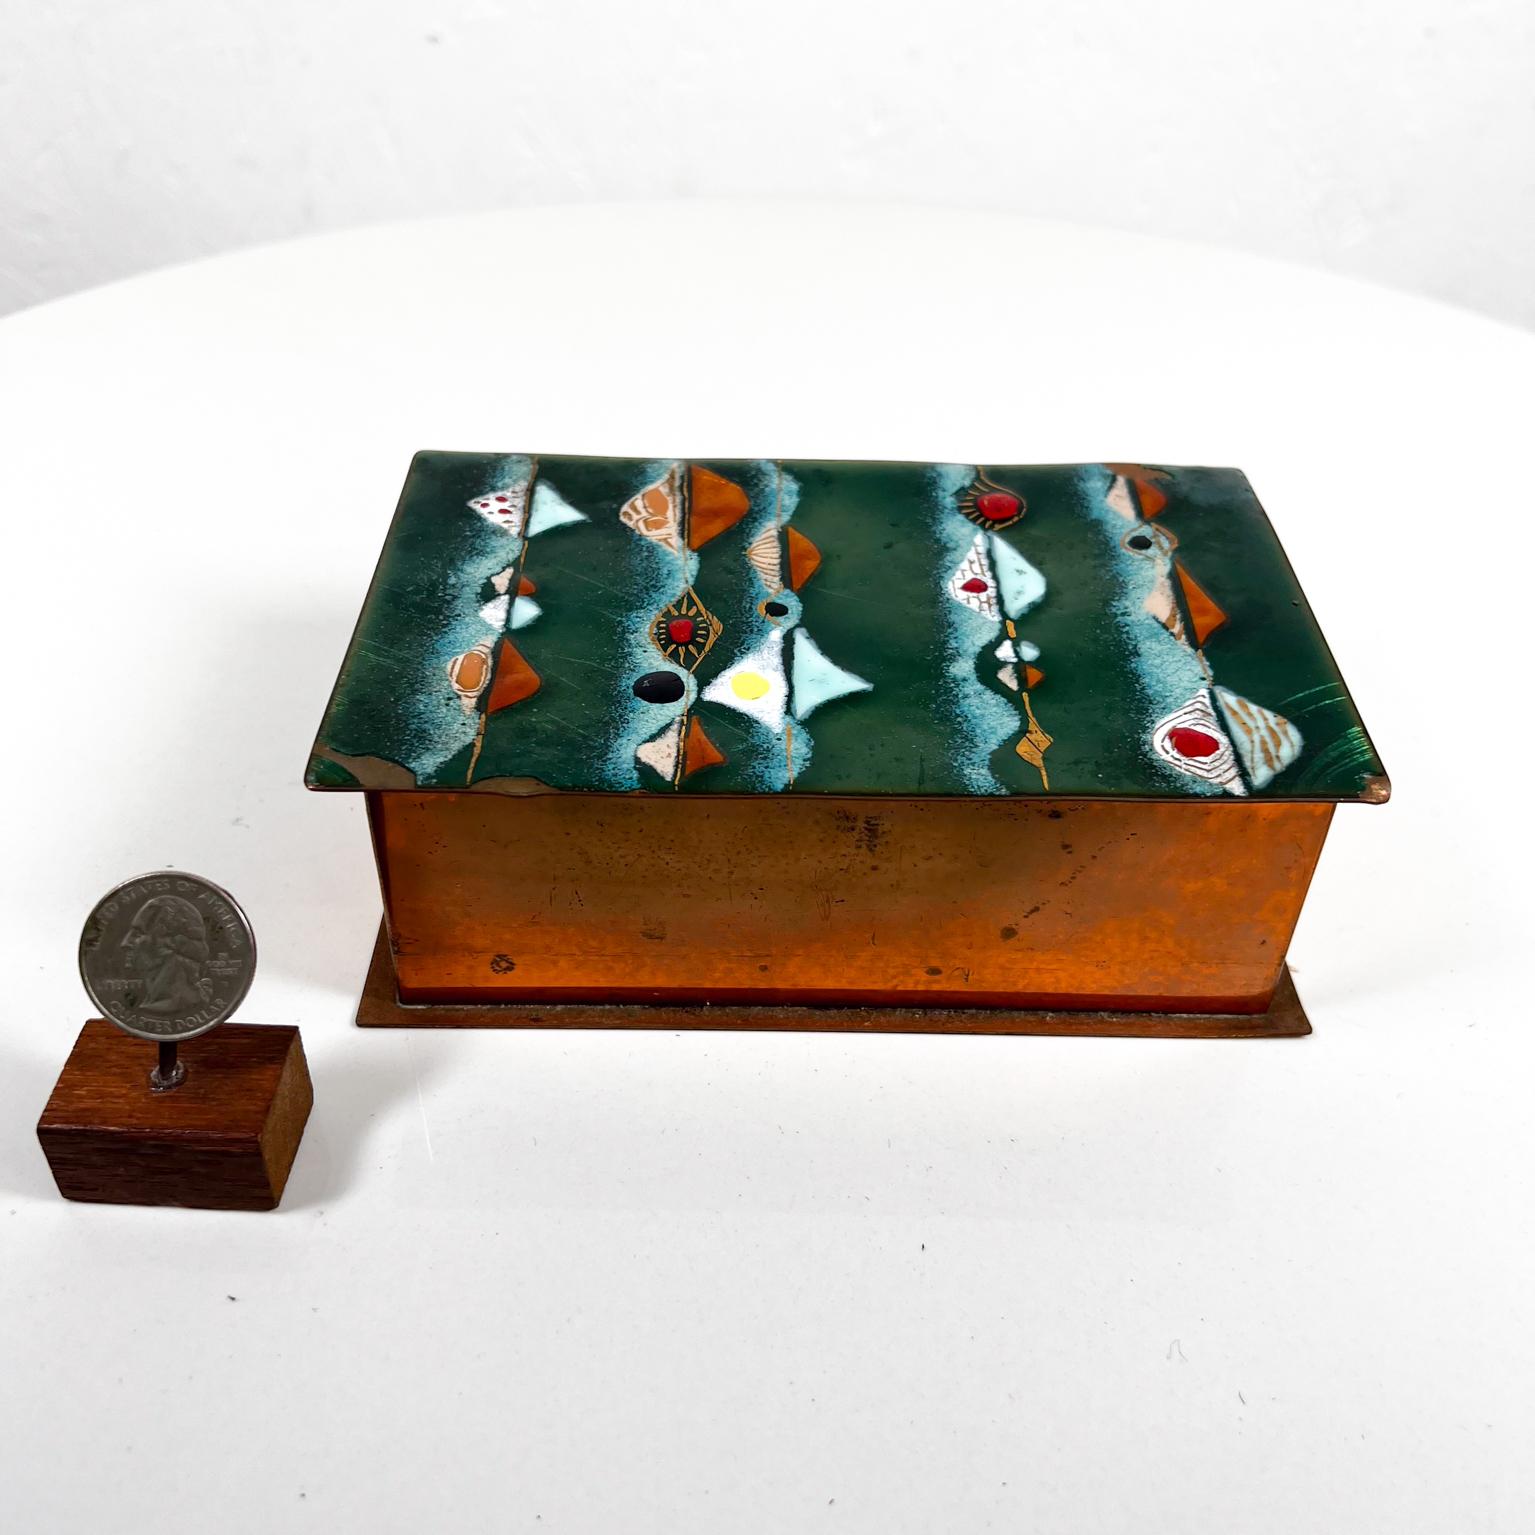 1970s Elegant craft Abstract Copper Enamel Trinket Box
6.13 w x 3.88 x 2 h
Original unrestored vintage condition
See all images.